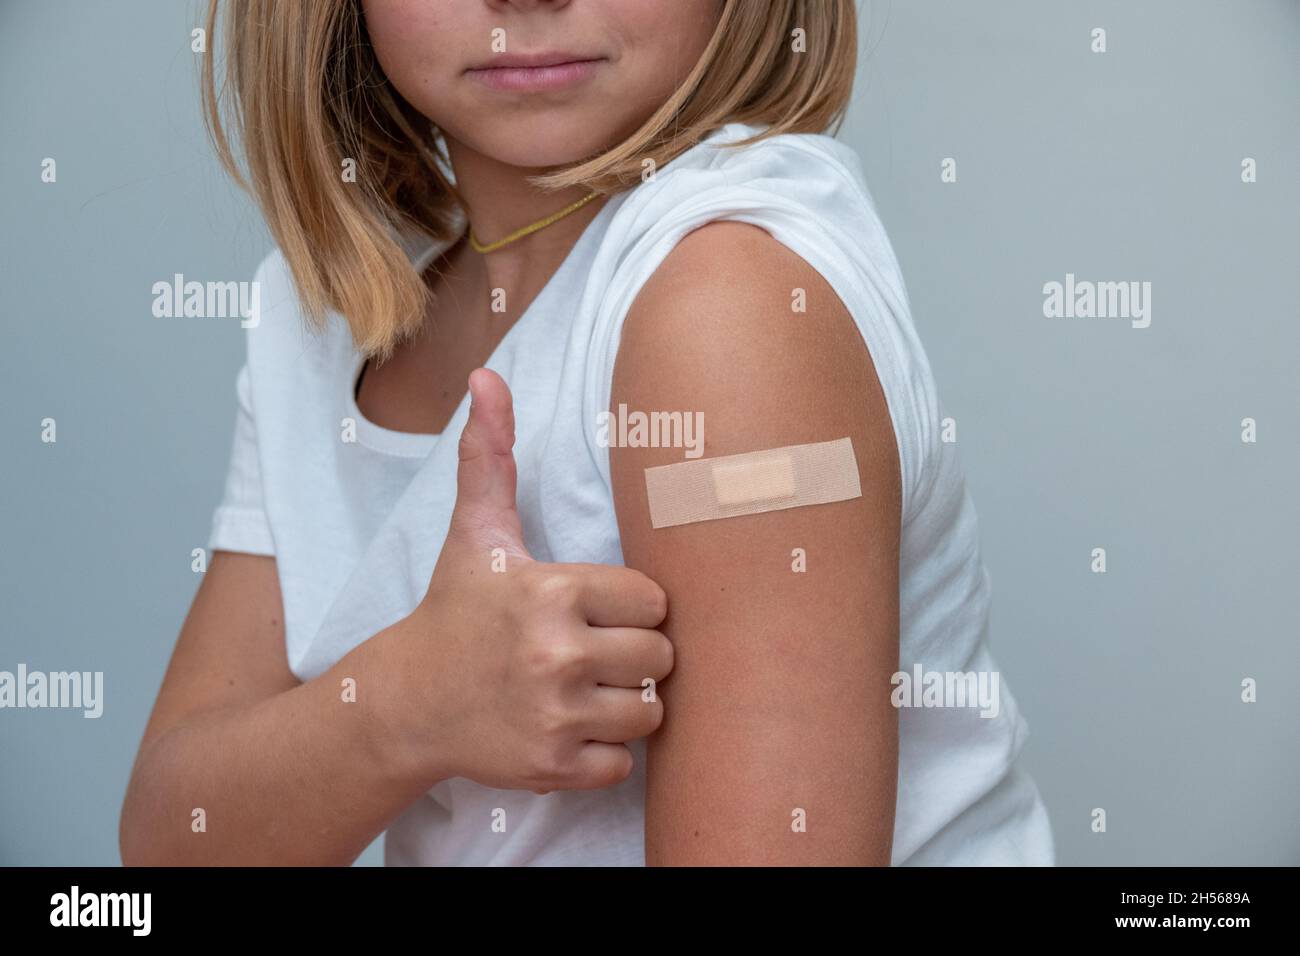 Children receiving vaccine at out side of the thigh.Children vaccine. Stock Photo